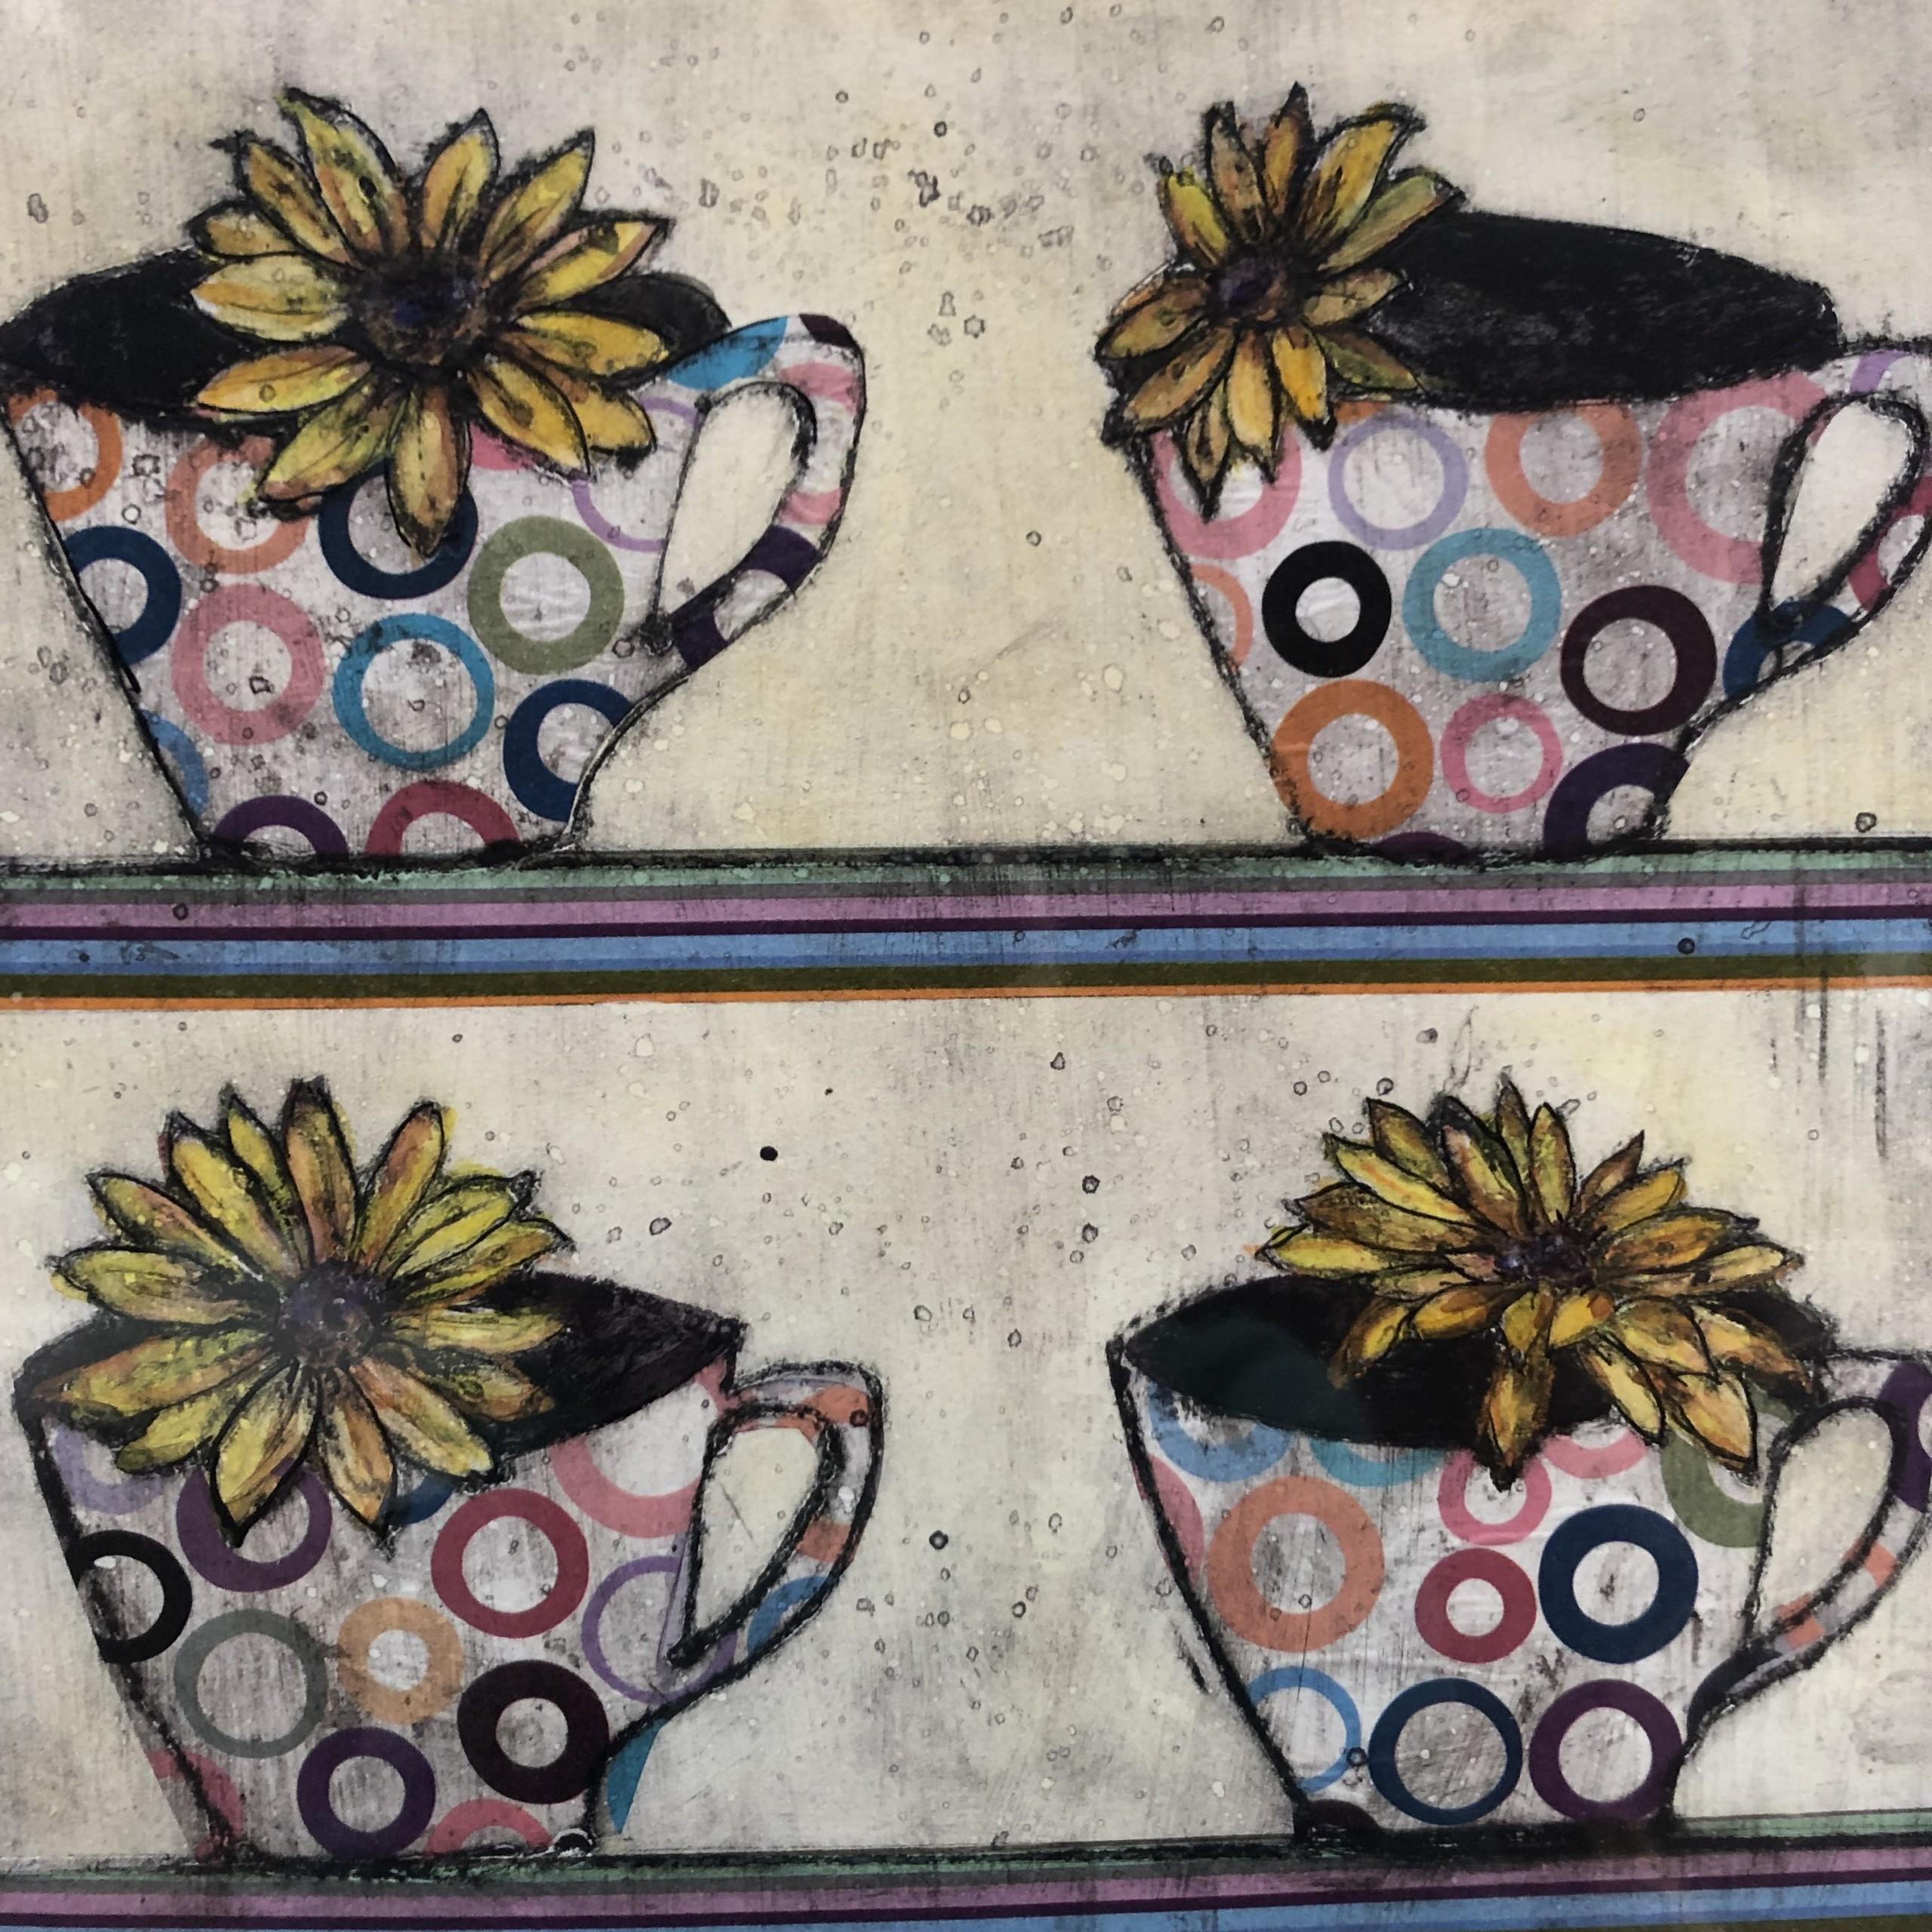 Cups in a Row is a limited edition hand coloured collagraph with chine colle by Vicky Oldfield.  Each print is individually painted, making every one unique.

Vicky Oldfield the artist is renowned for her distinctive pictures; the subjects are the